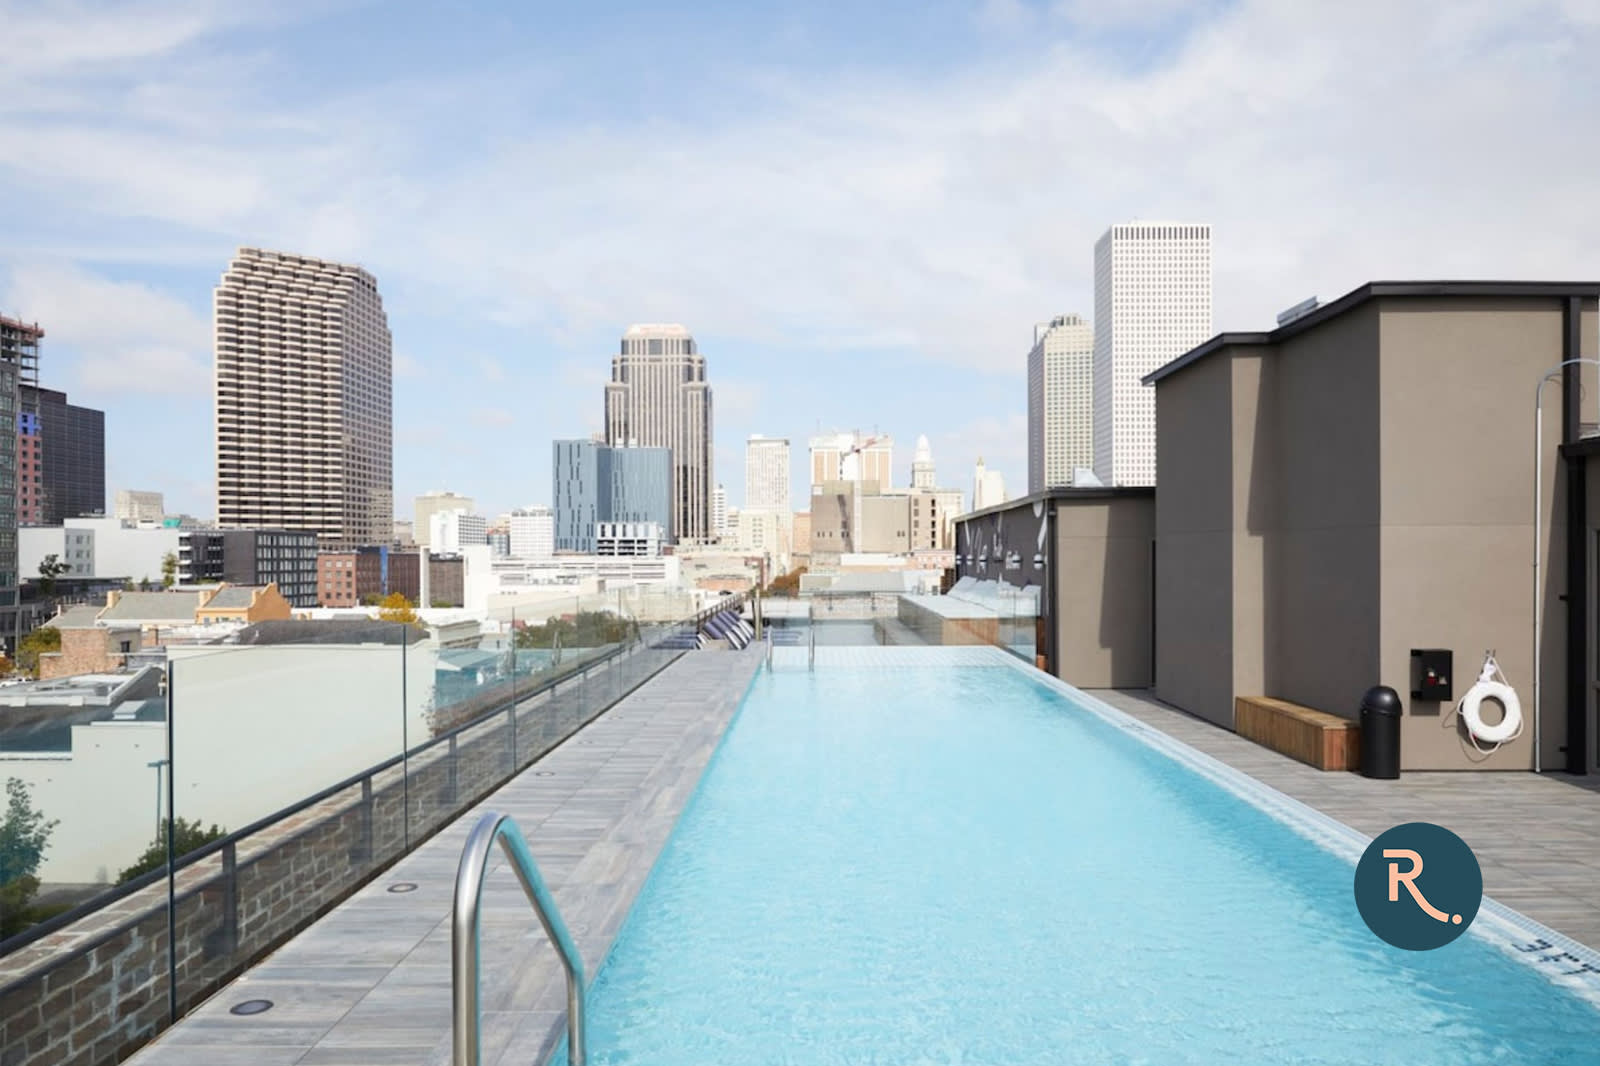 Property Image 1 - Property Manager | 7min walk Bourbon St | Rooftop Heated Pool